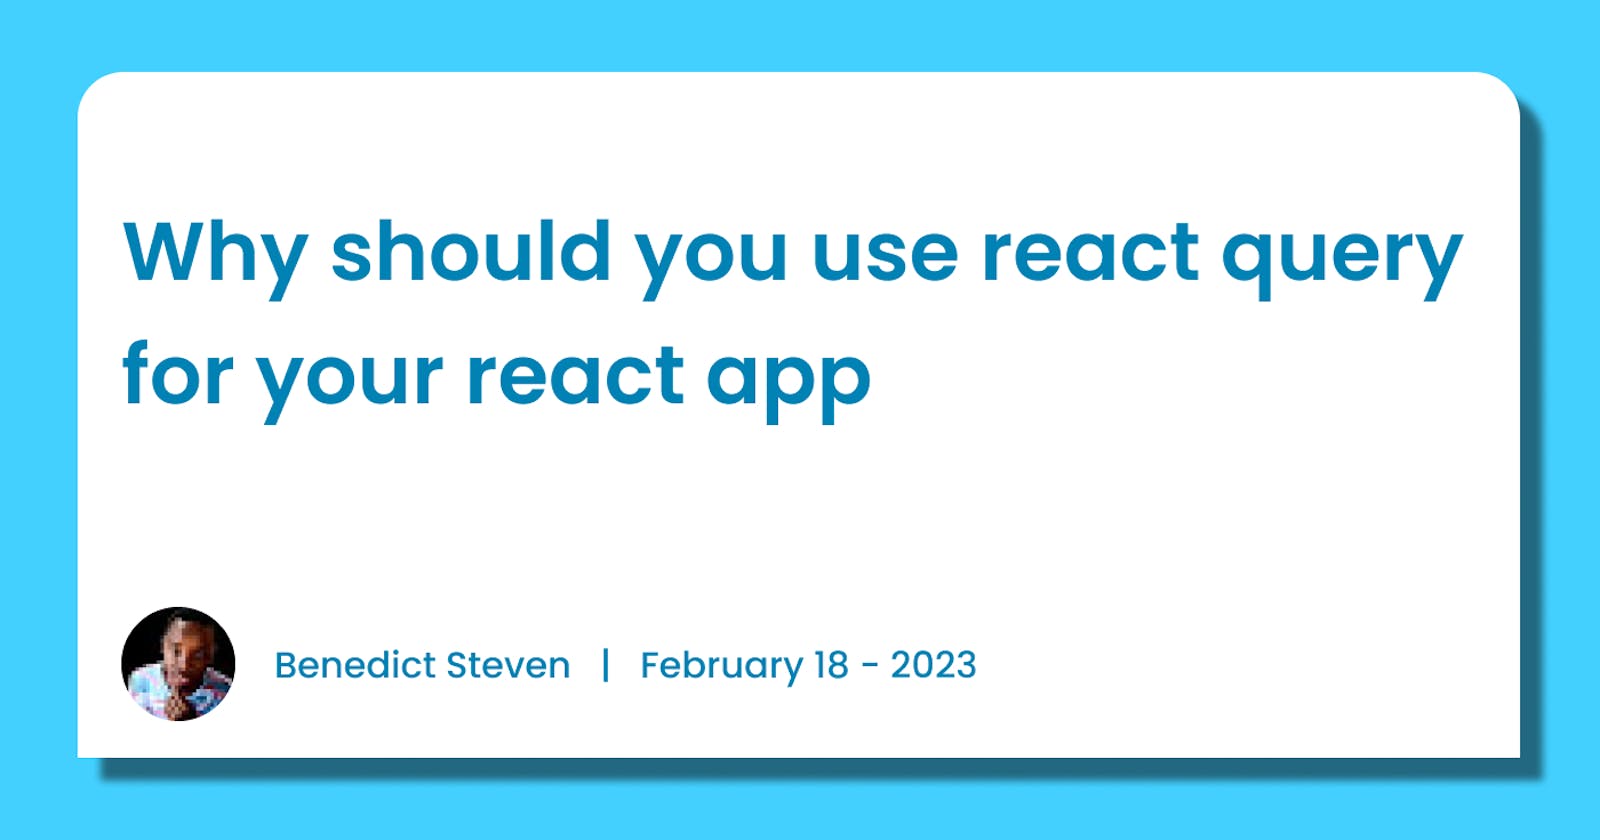 Why should you use react query for your react app